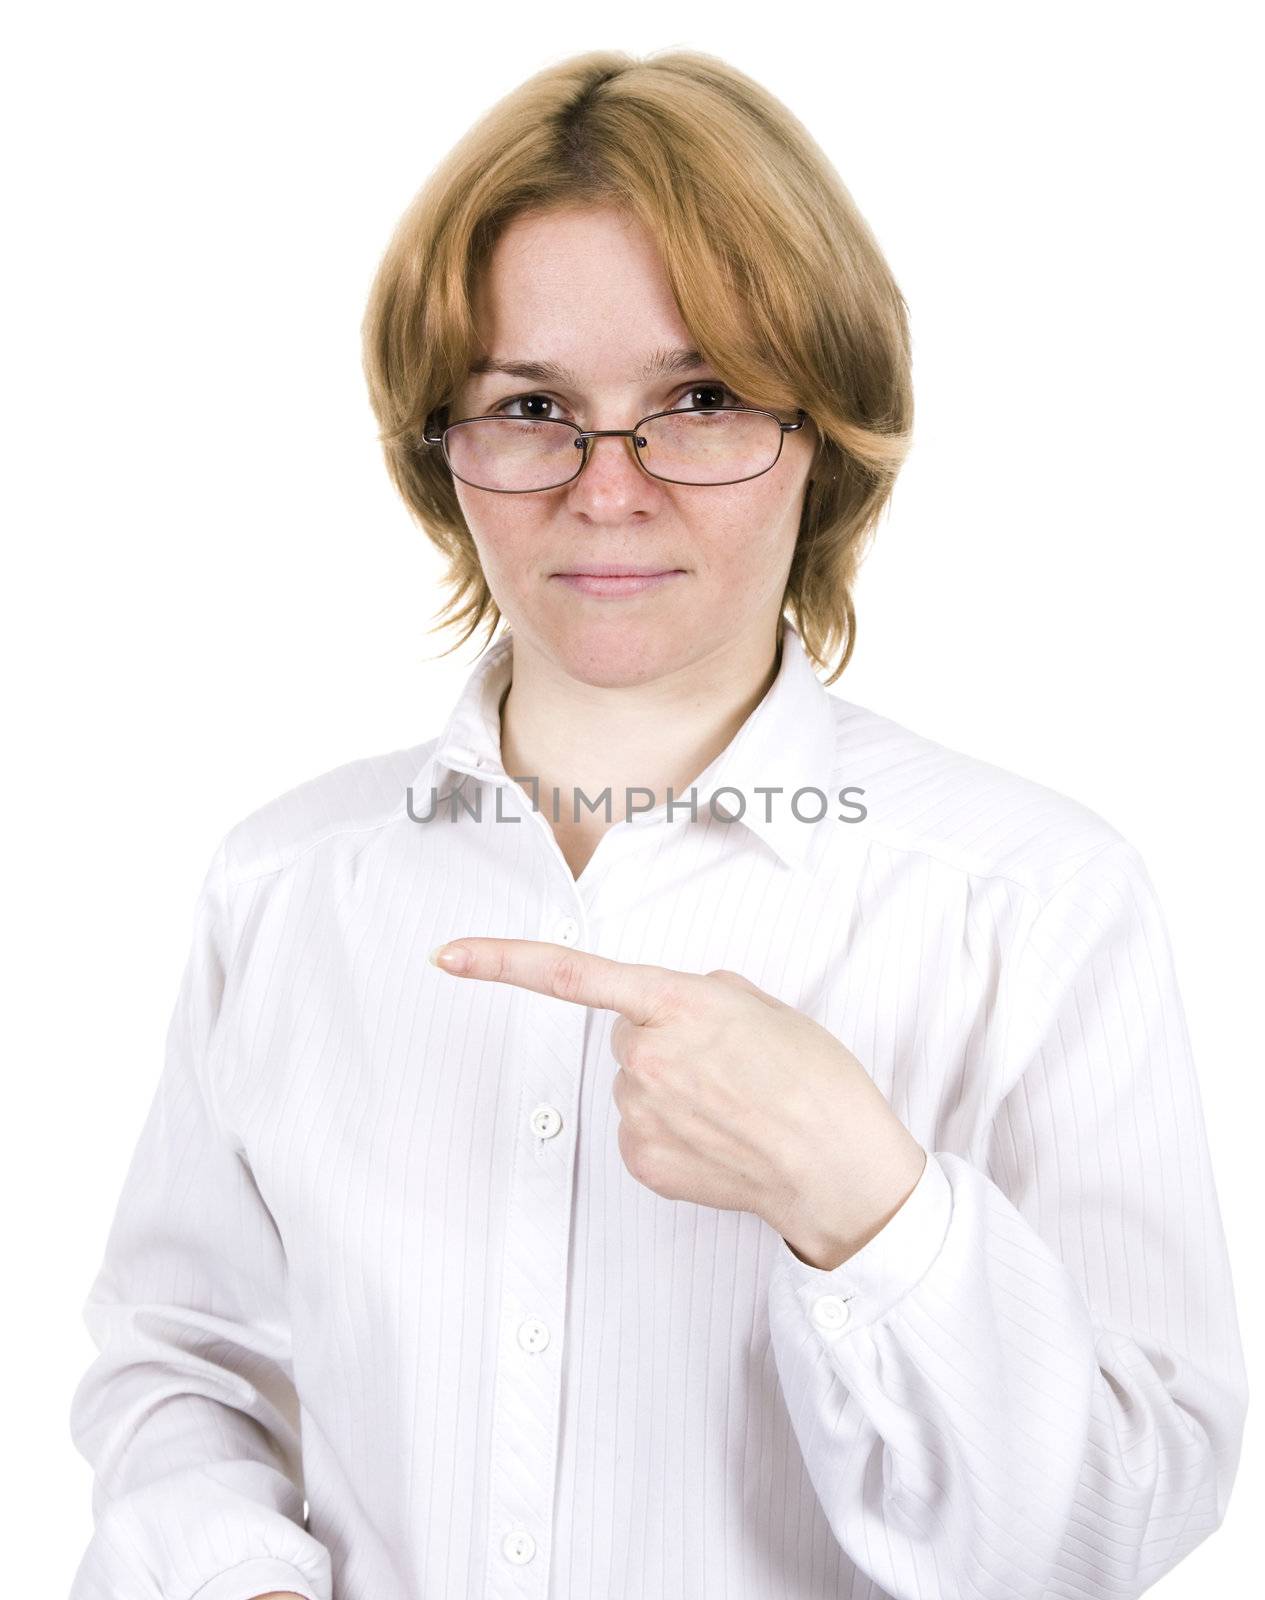 The girl isolated on a white background